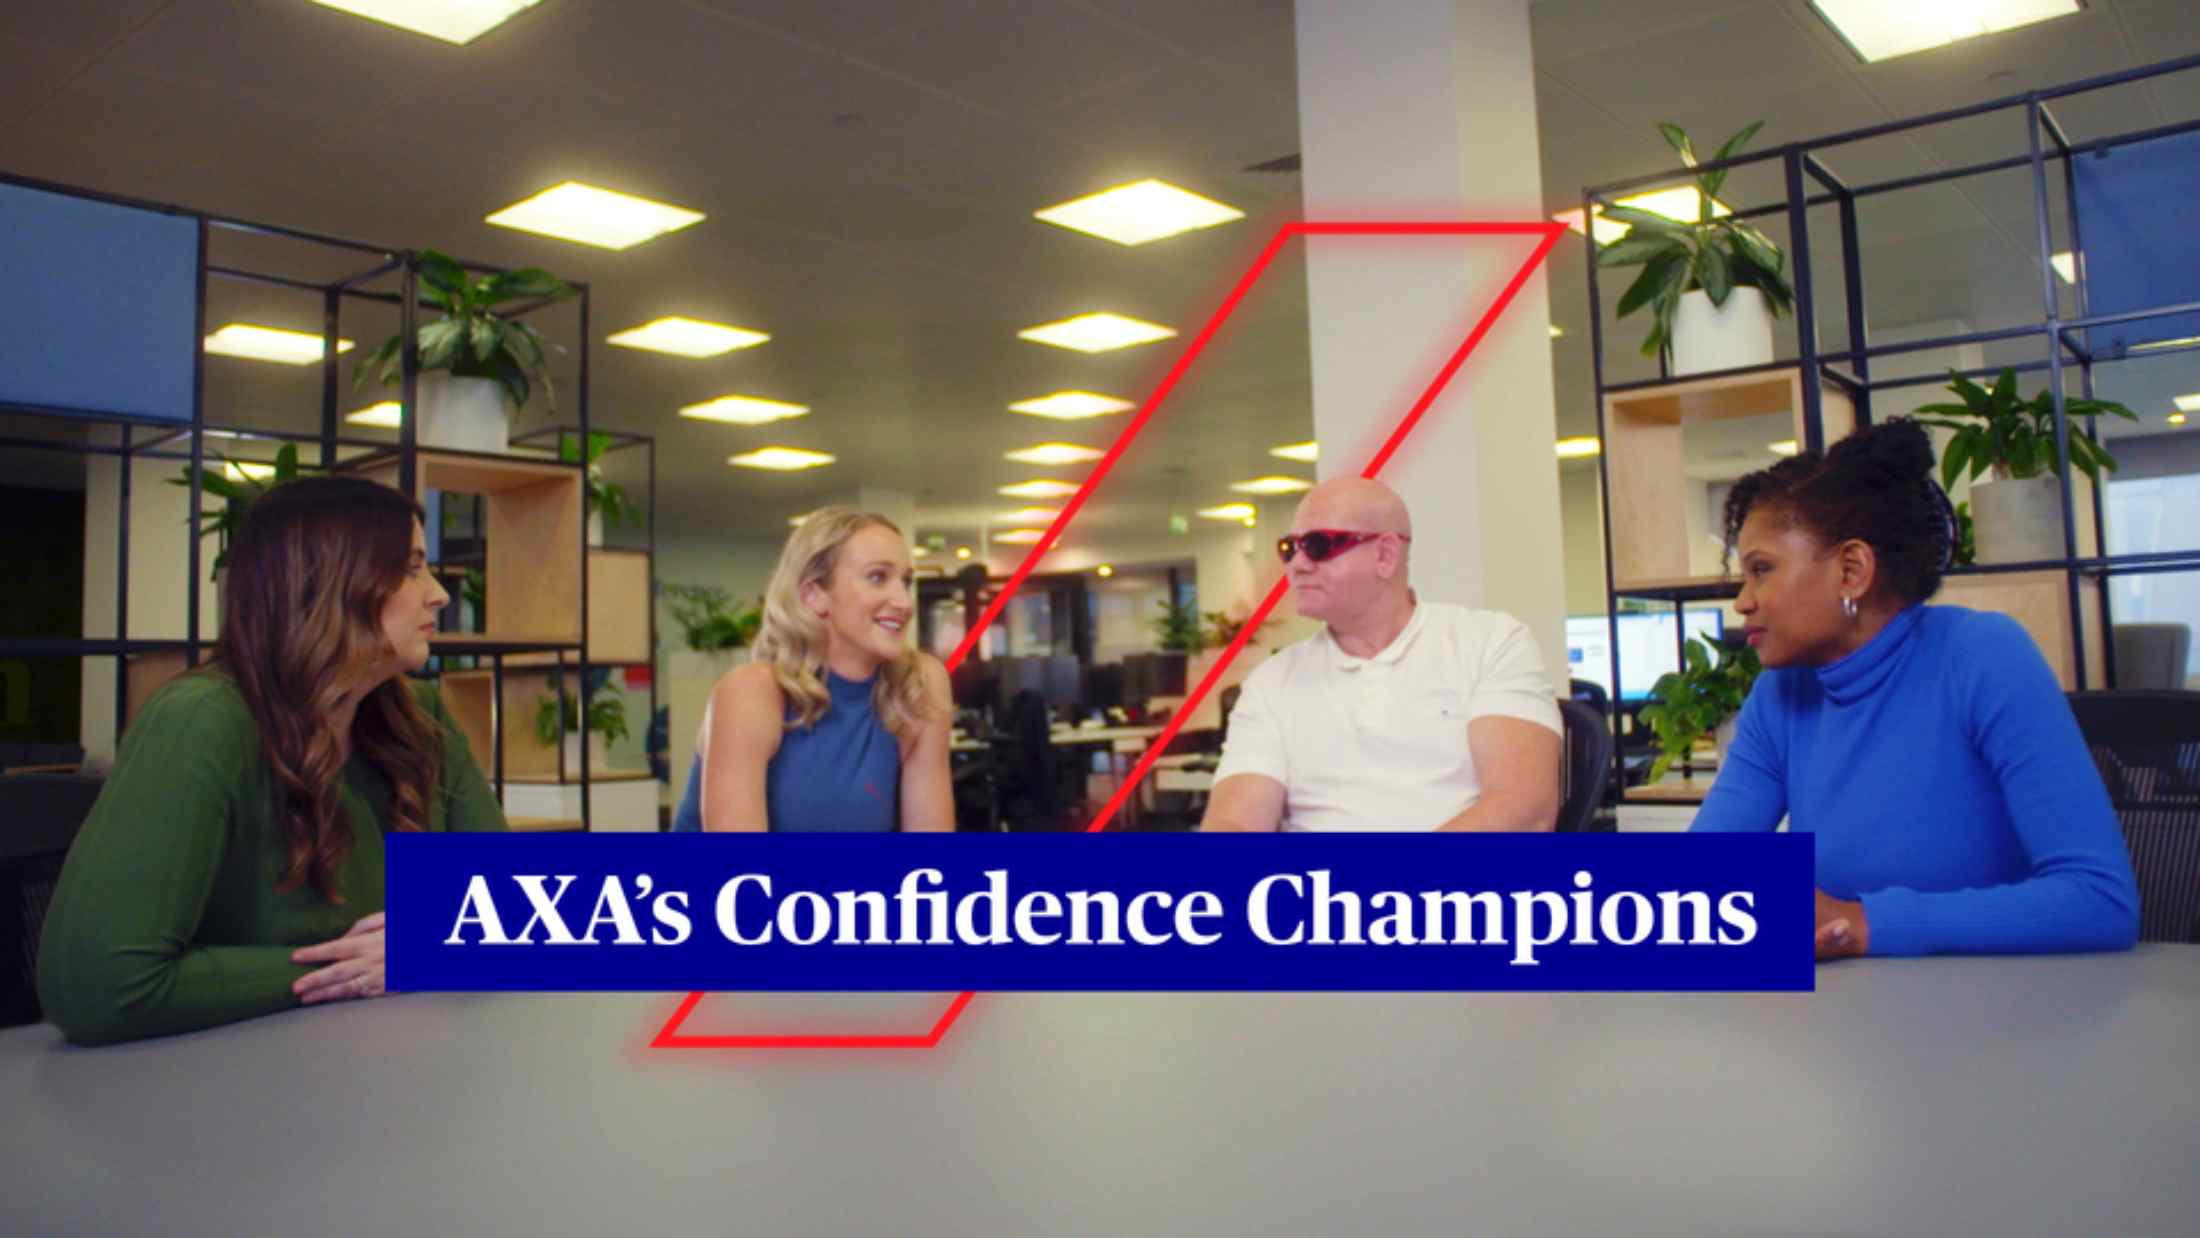 Amy interviews with AXA confidence champions